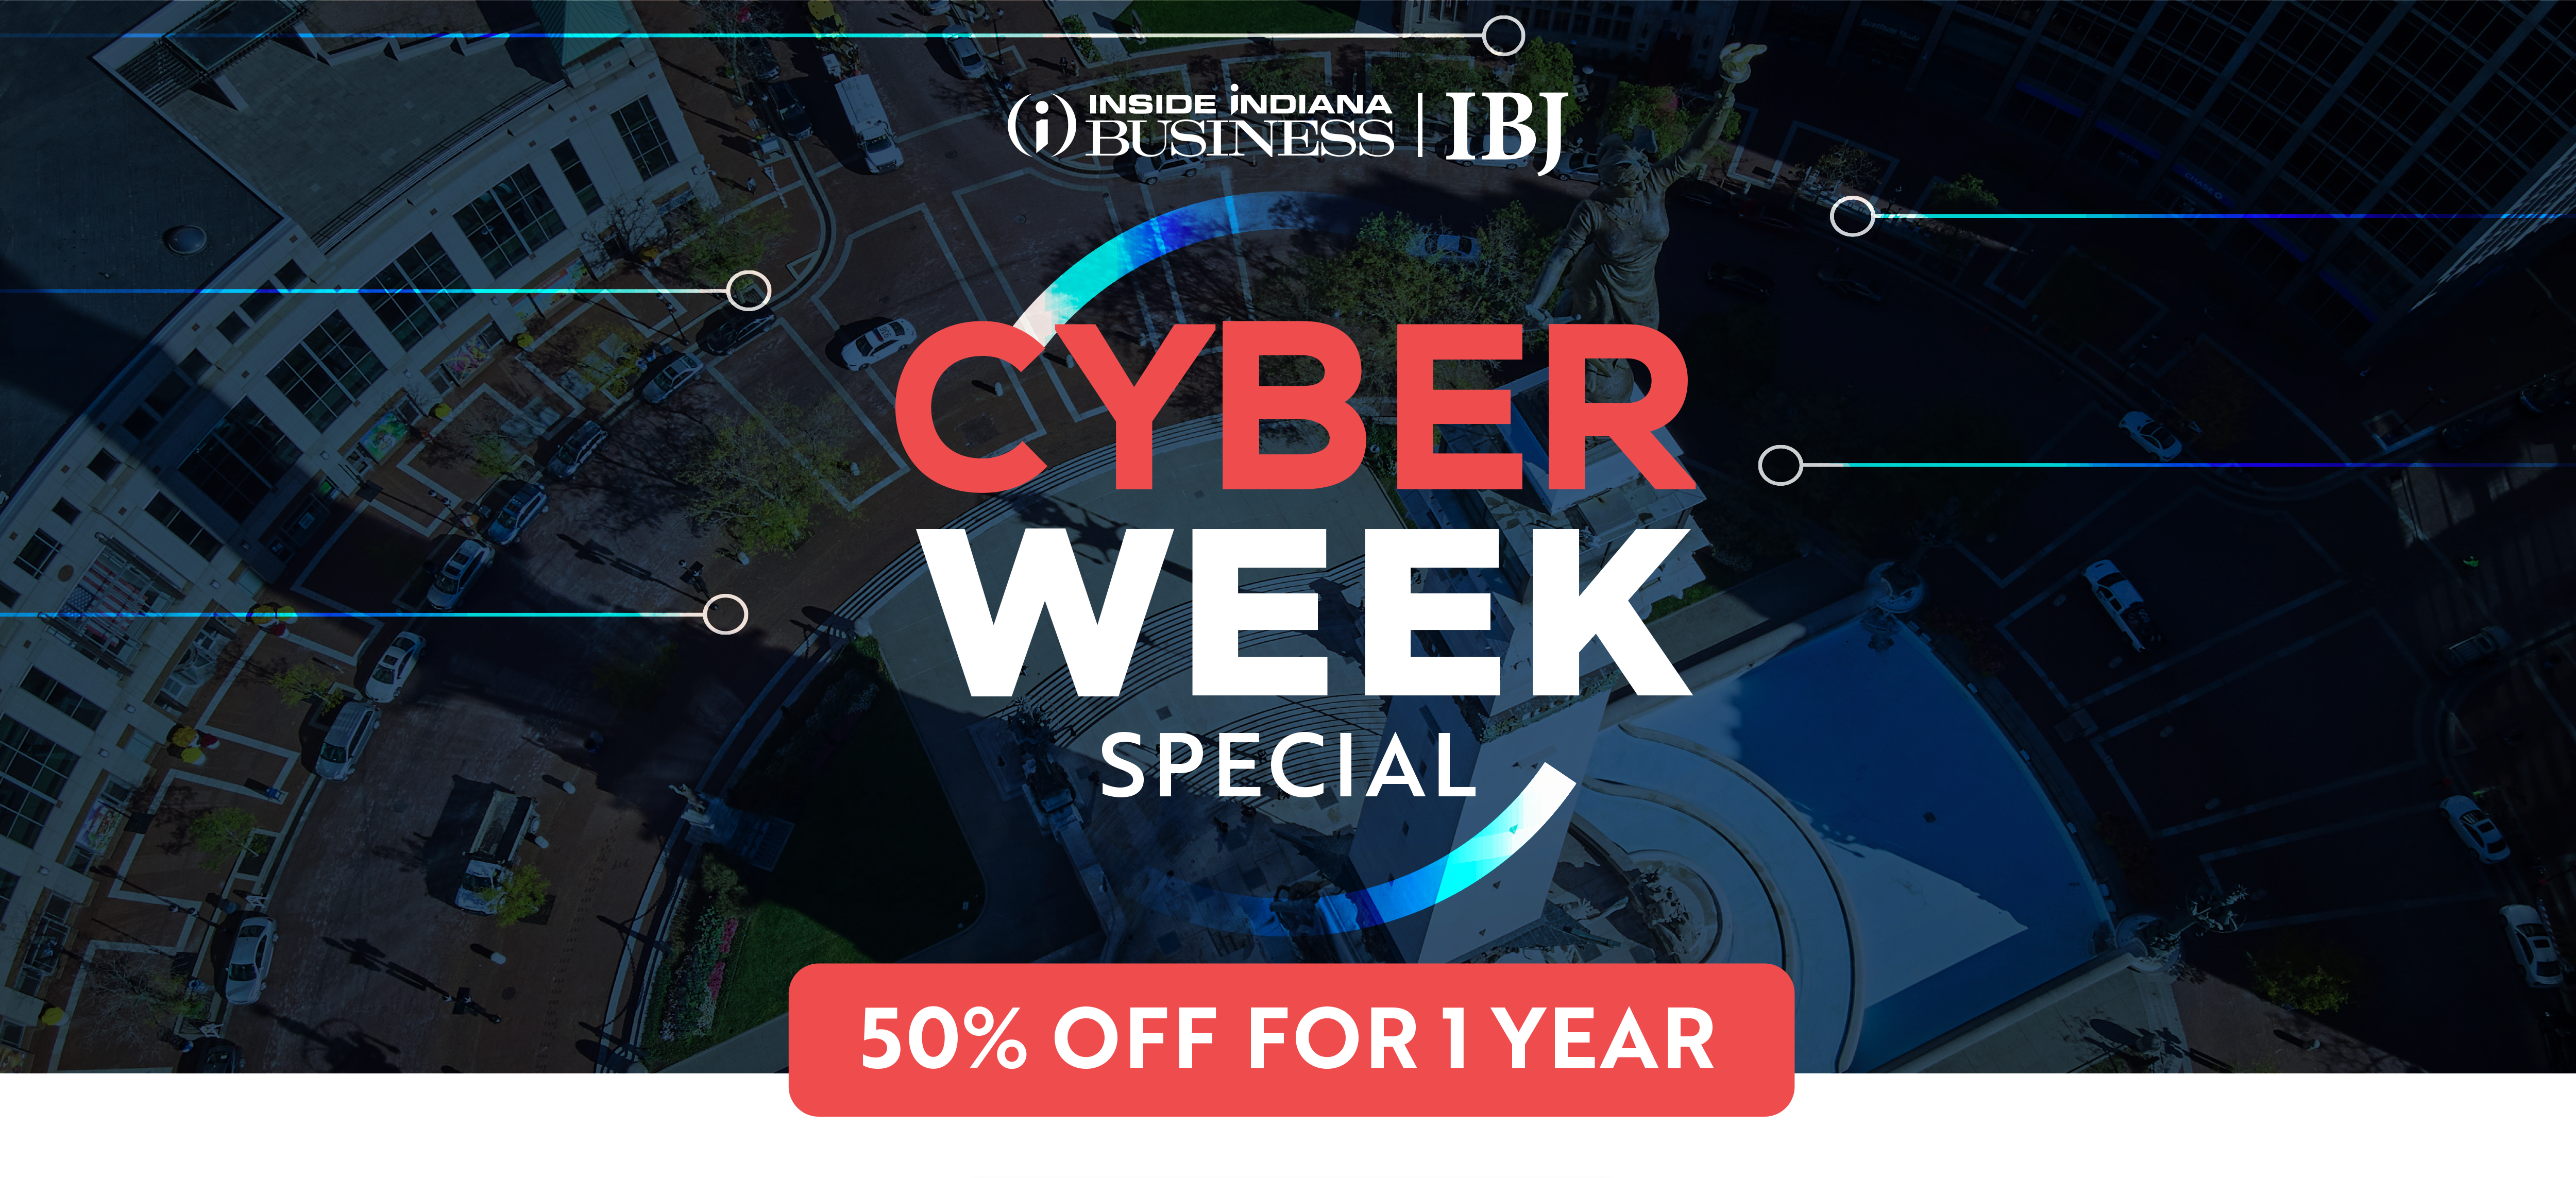 Inside Indiana Business, IBJ, Cyber Week Special, Fifty percent off for one year.